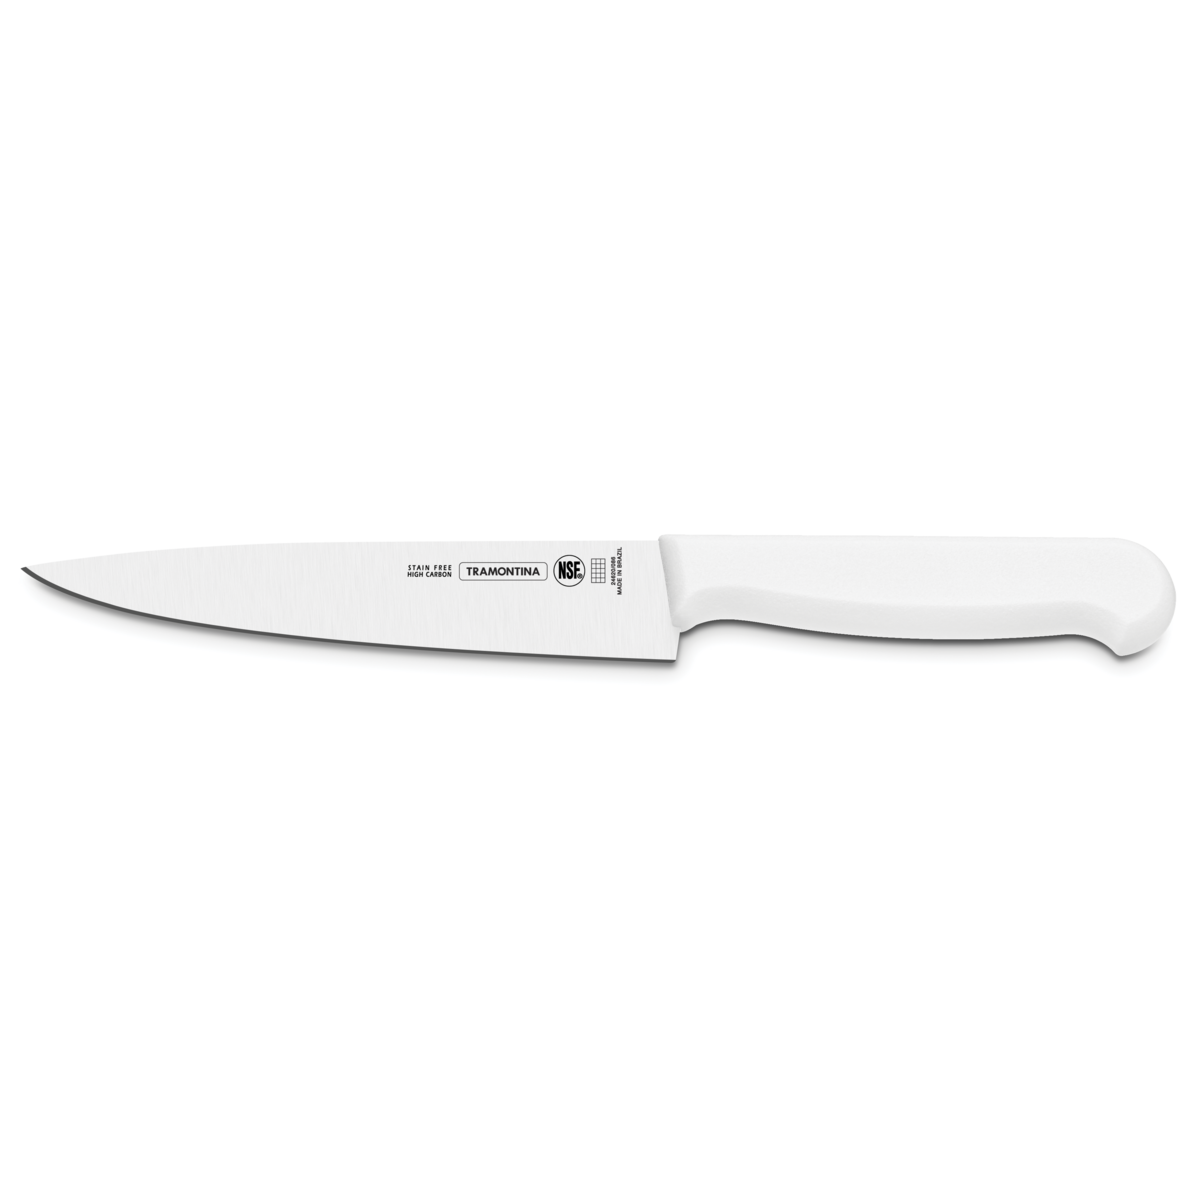 Tramontina Meat Knife Professional 10" - 24620/080